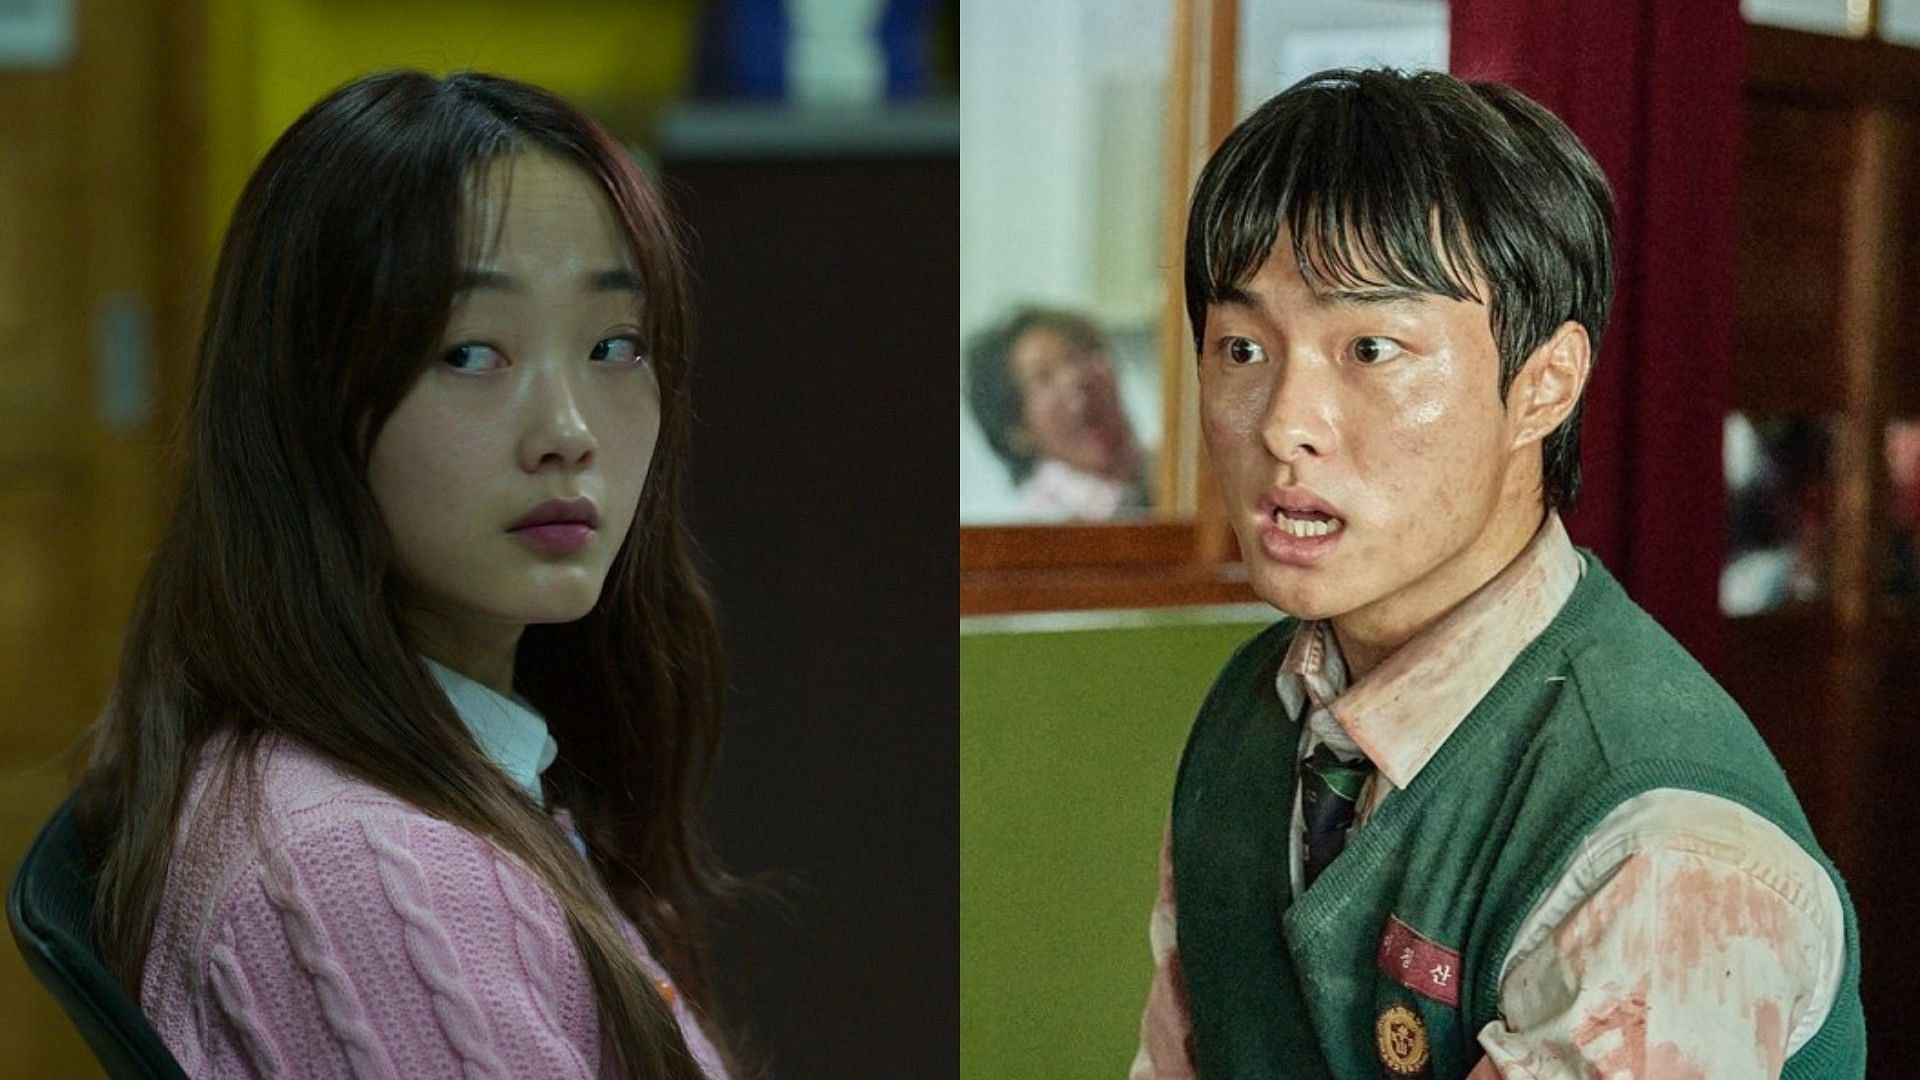 Yoon Chan-young and Lee Yoo-mi led pretty different lives before attaining stardom (Image via Netflix)